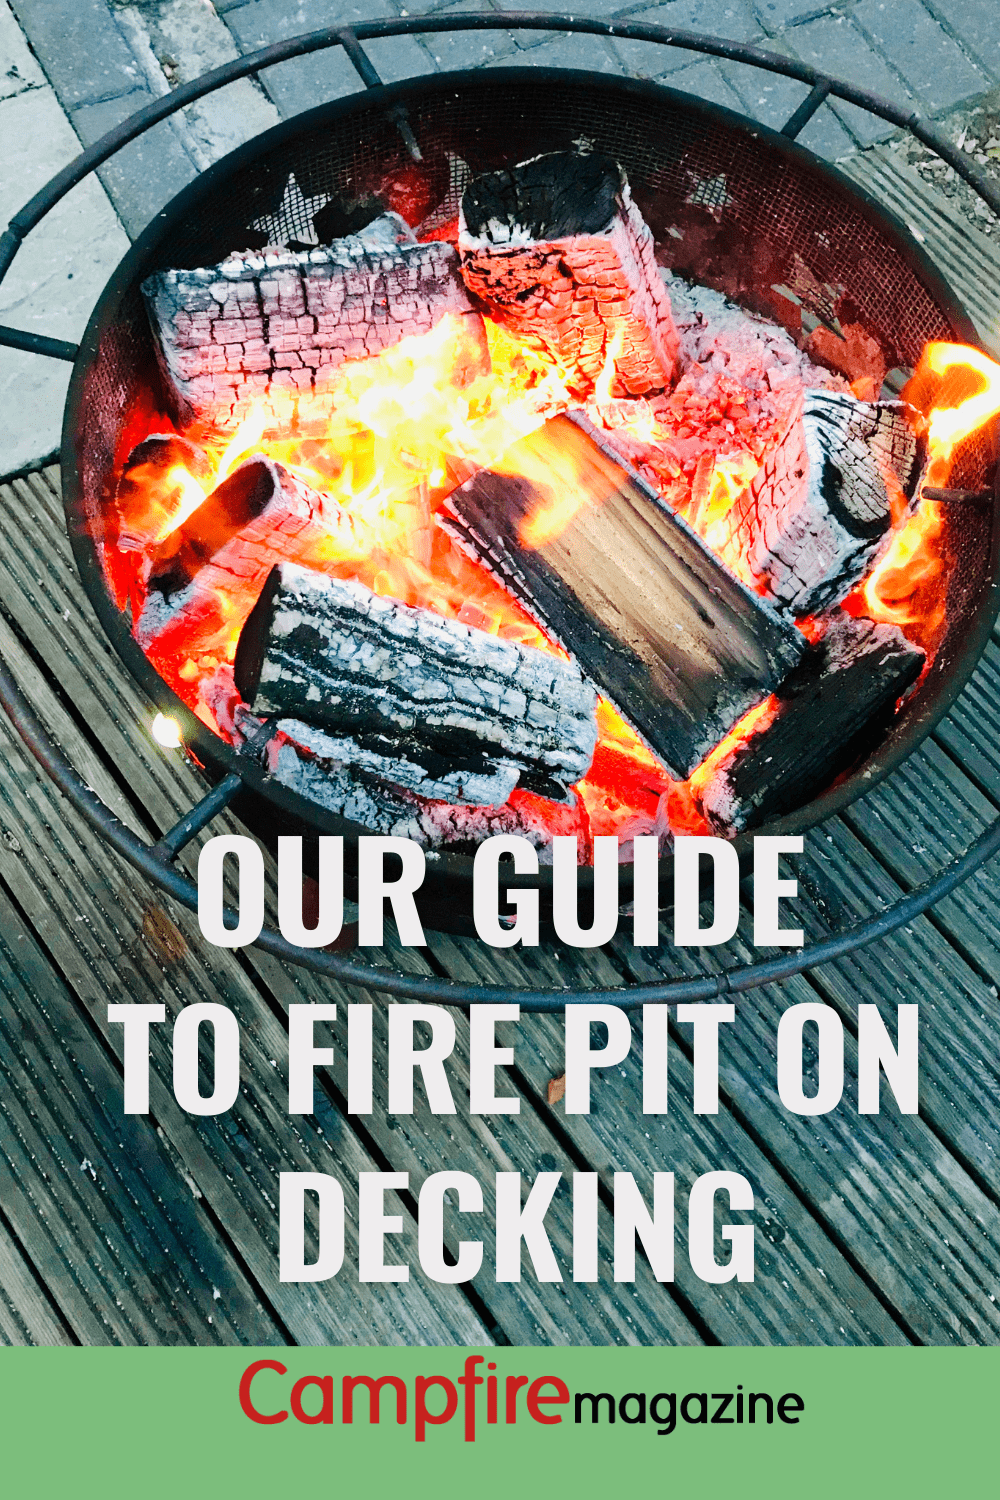 Our Guide To Have A Fire Pit On Decking, Are Fire Pits Safe For Decks